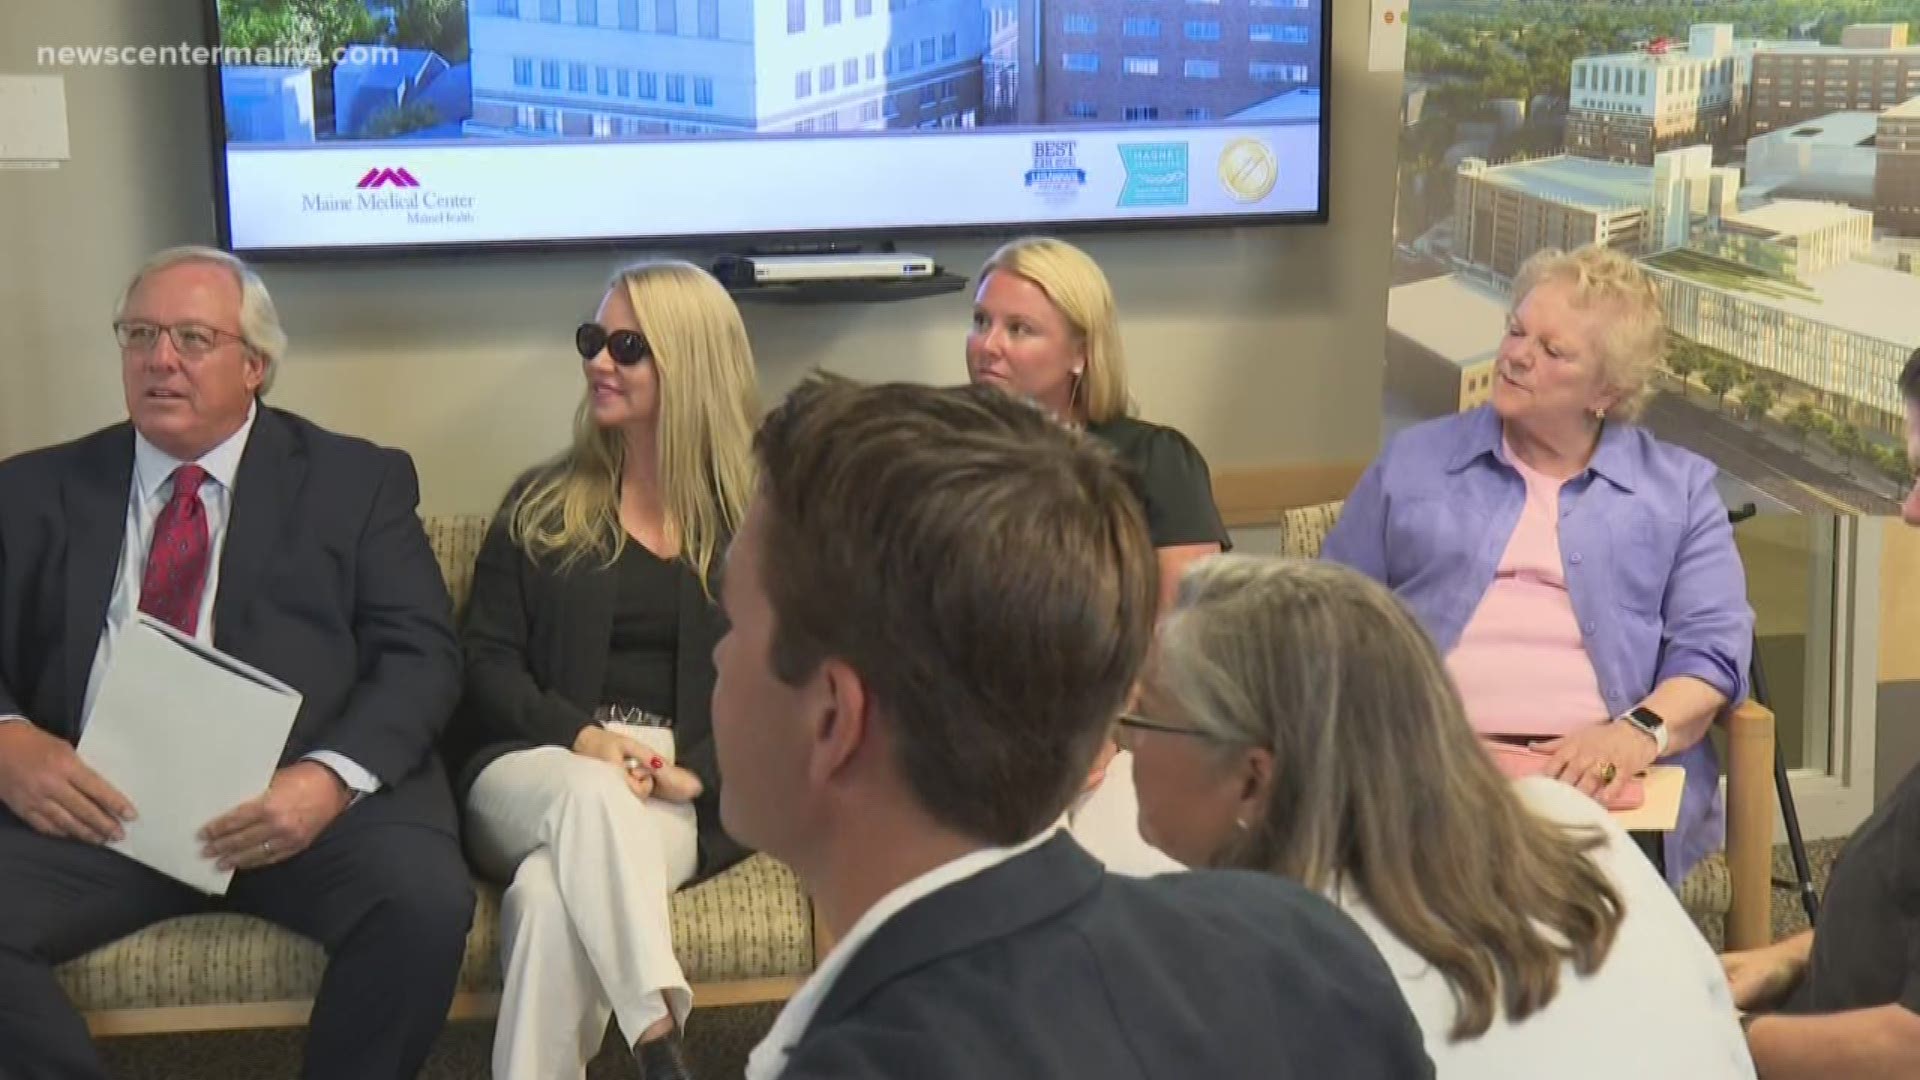 The $7.5 million gift is the largest one from any family in Maine Medical Center's history.